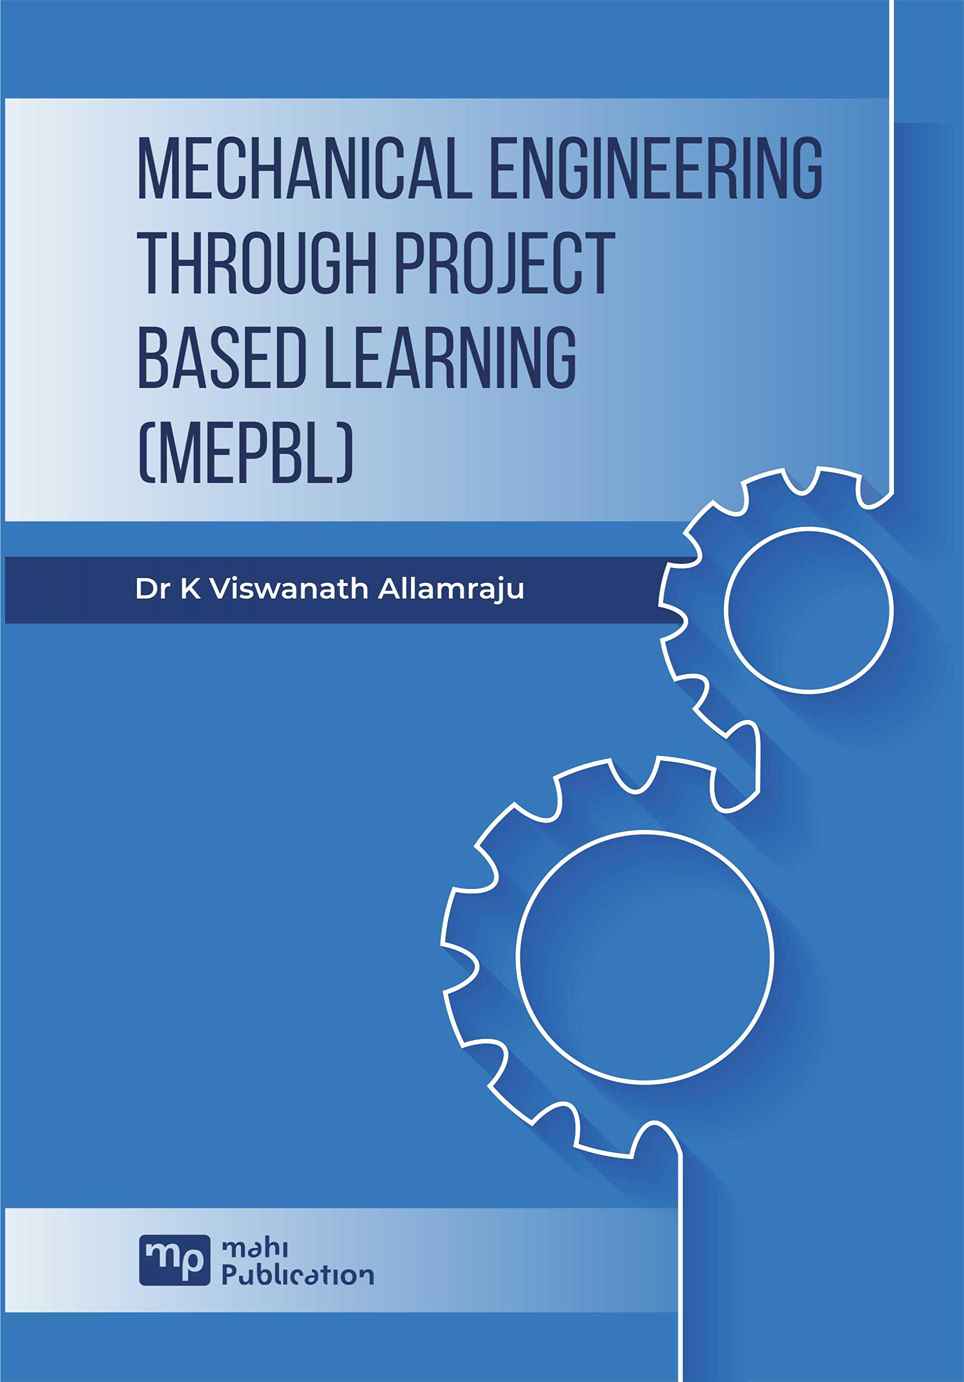 Mechanical Engineering Through Project Based Learning (mepbl)